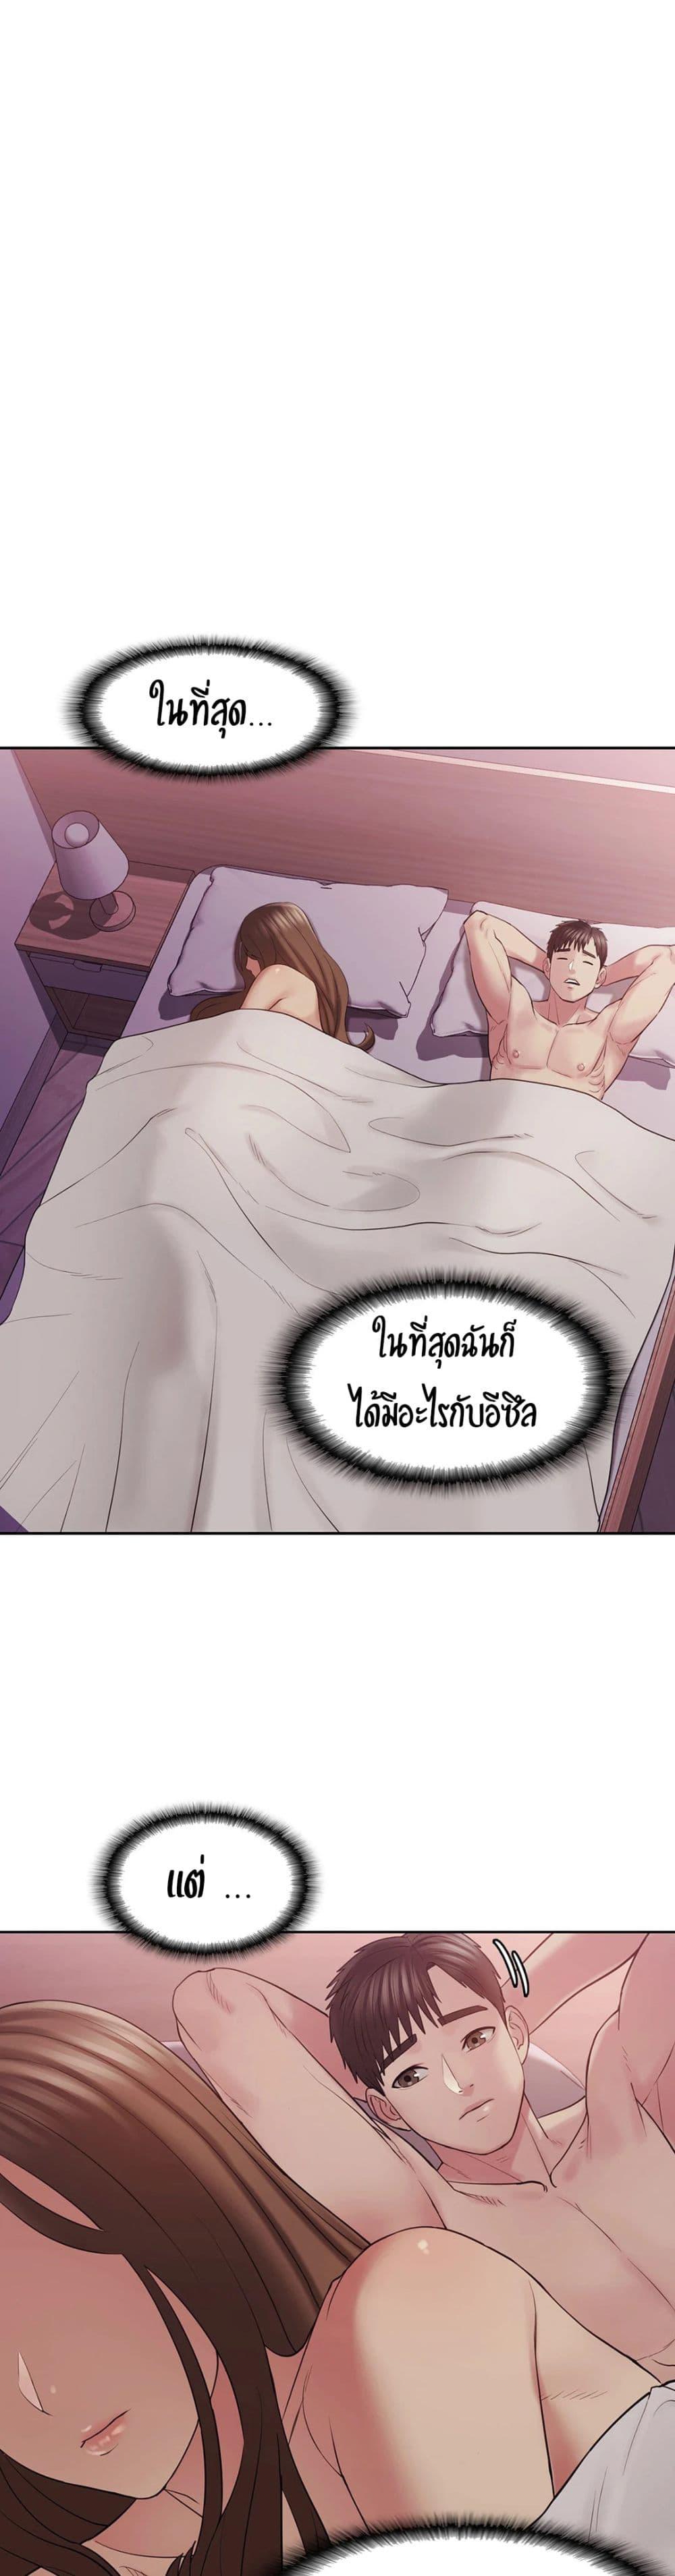 Sexual Consulting 1 ภาพ 48